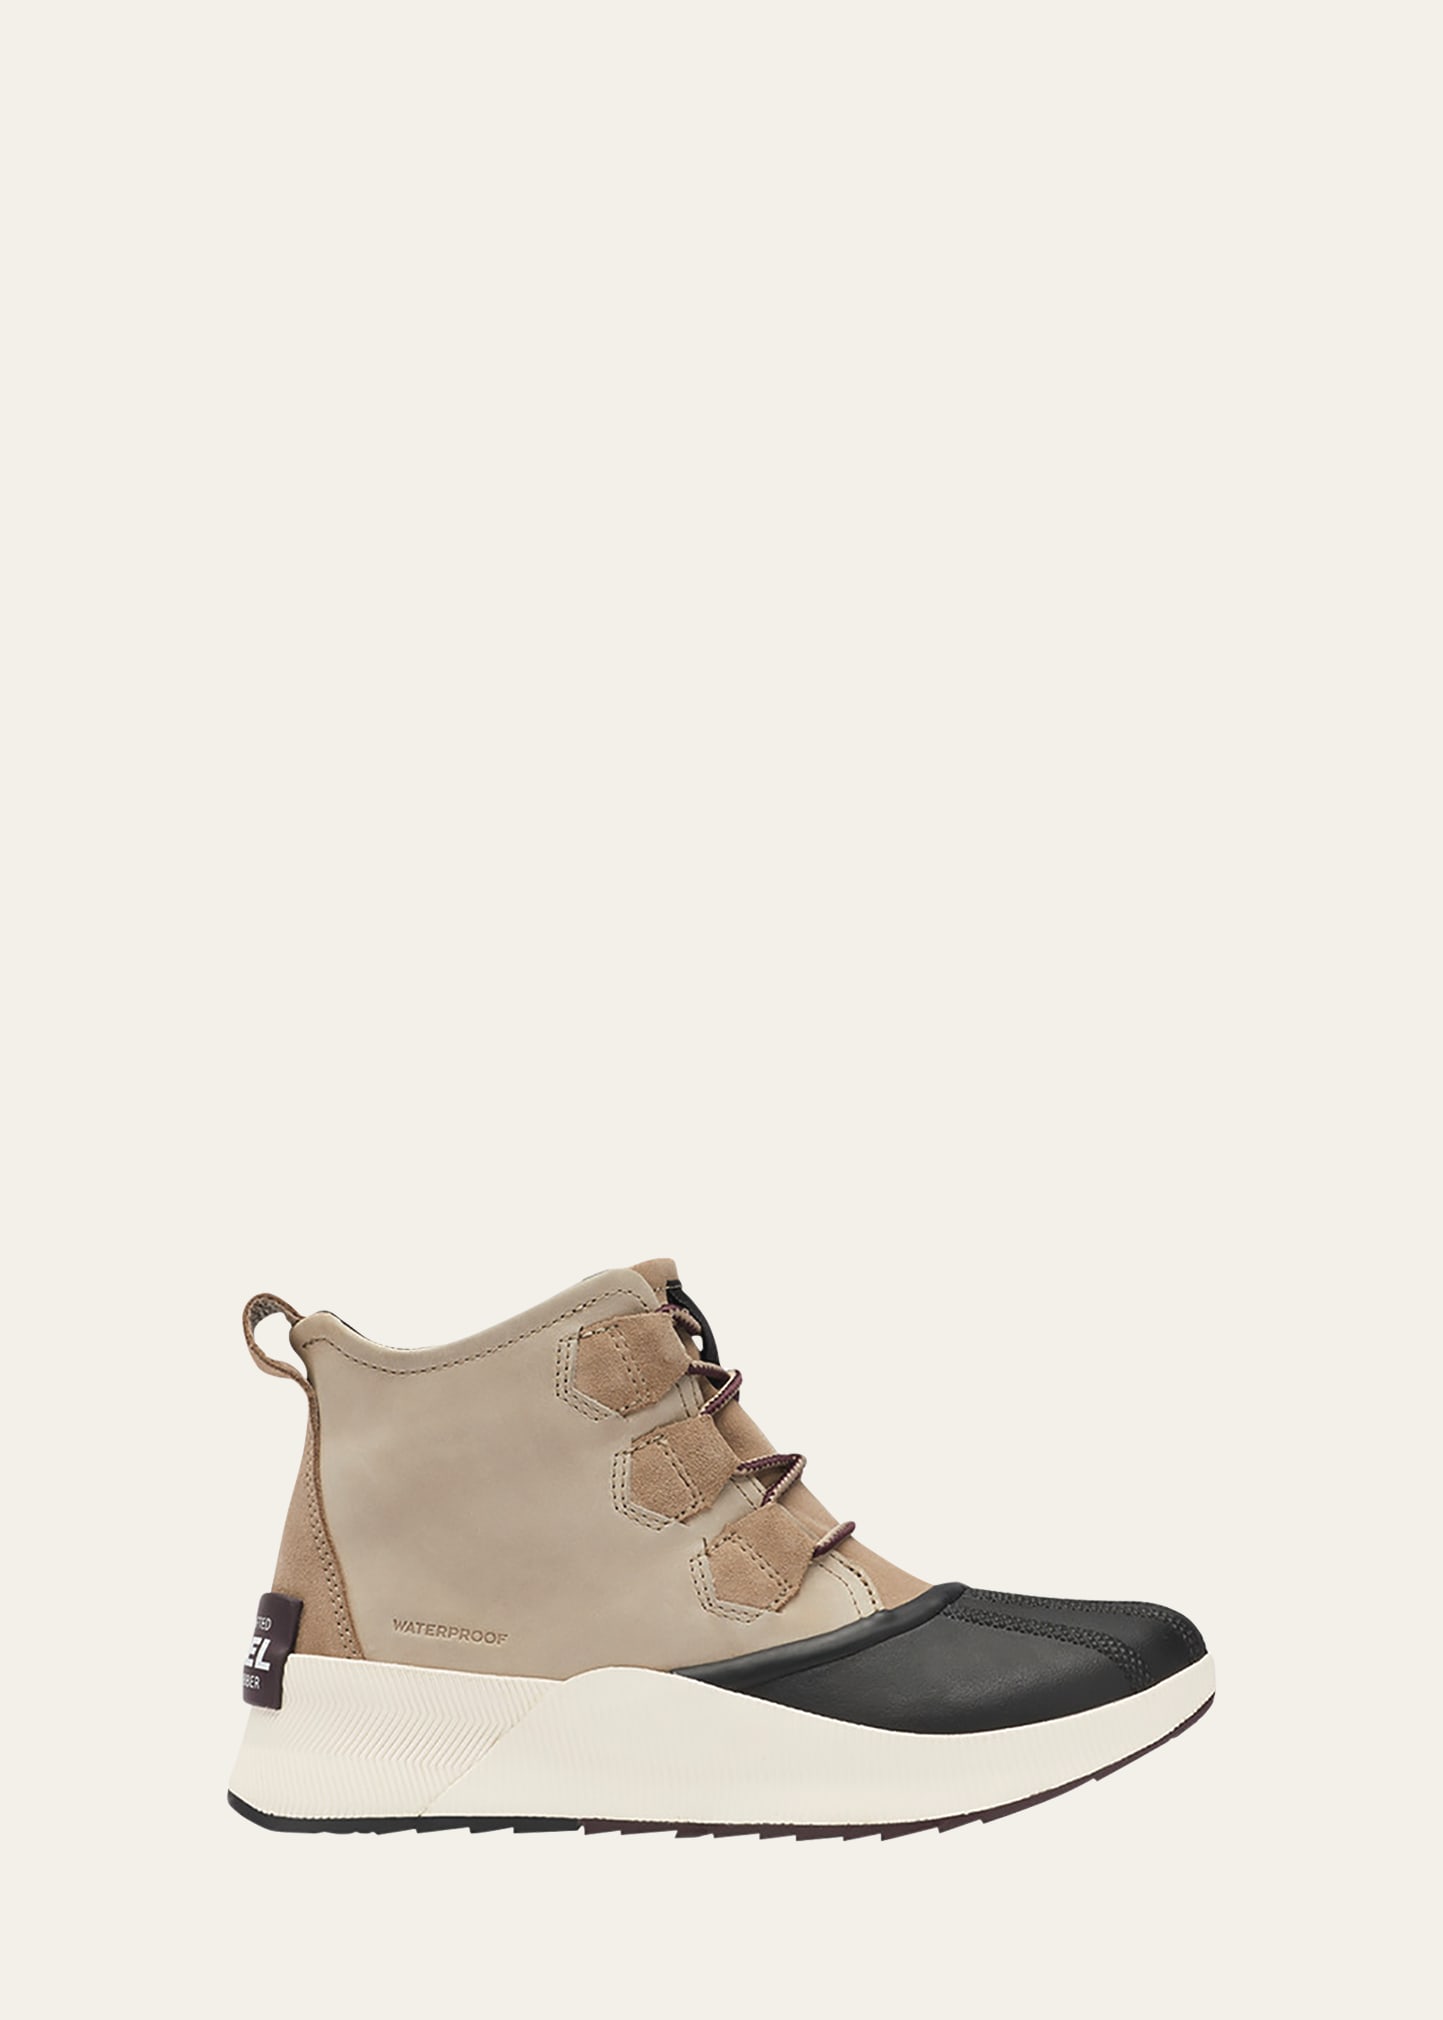 ONA mixed Leather Lace-Up Sport Booties